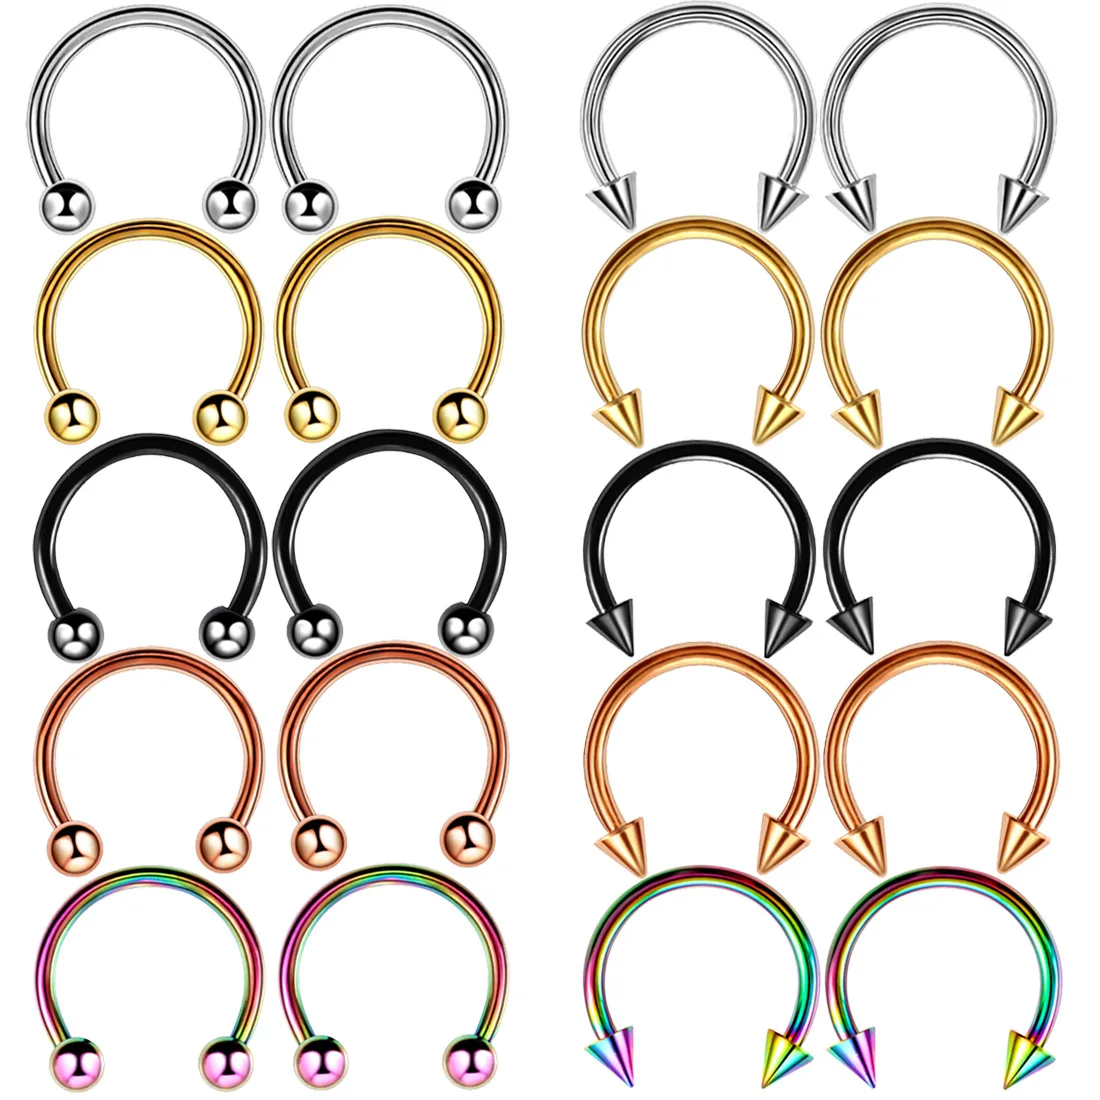 

SUNRAIN Nose Septum Ring Nose Horseshoe Ring 316L Stainless Steel Circular Piercing Tragus Ear Cartilage Body Jewelry Piercing, Gold ,silver,rose gold